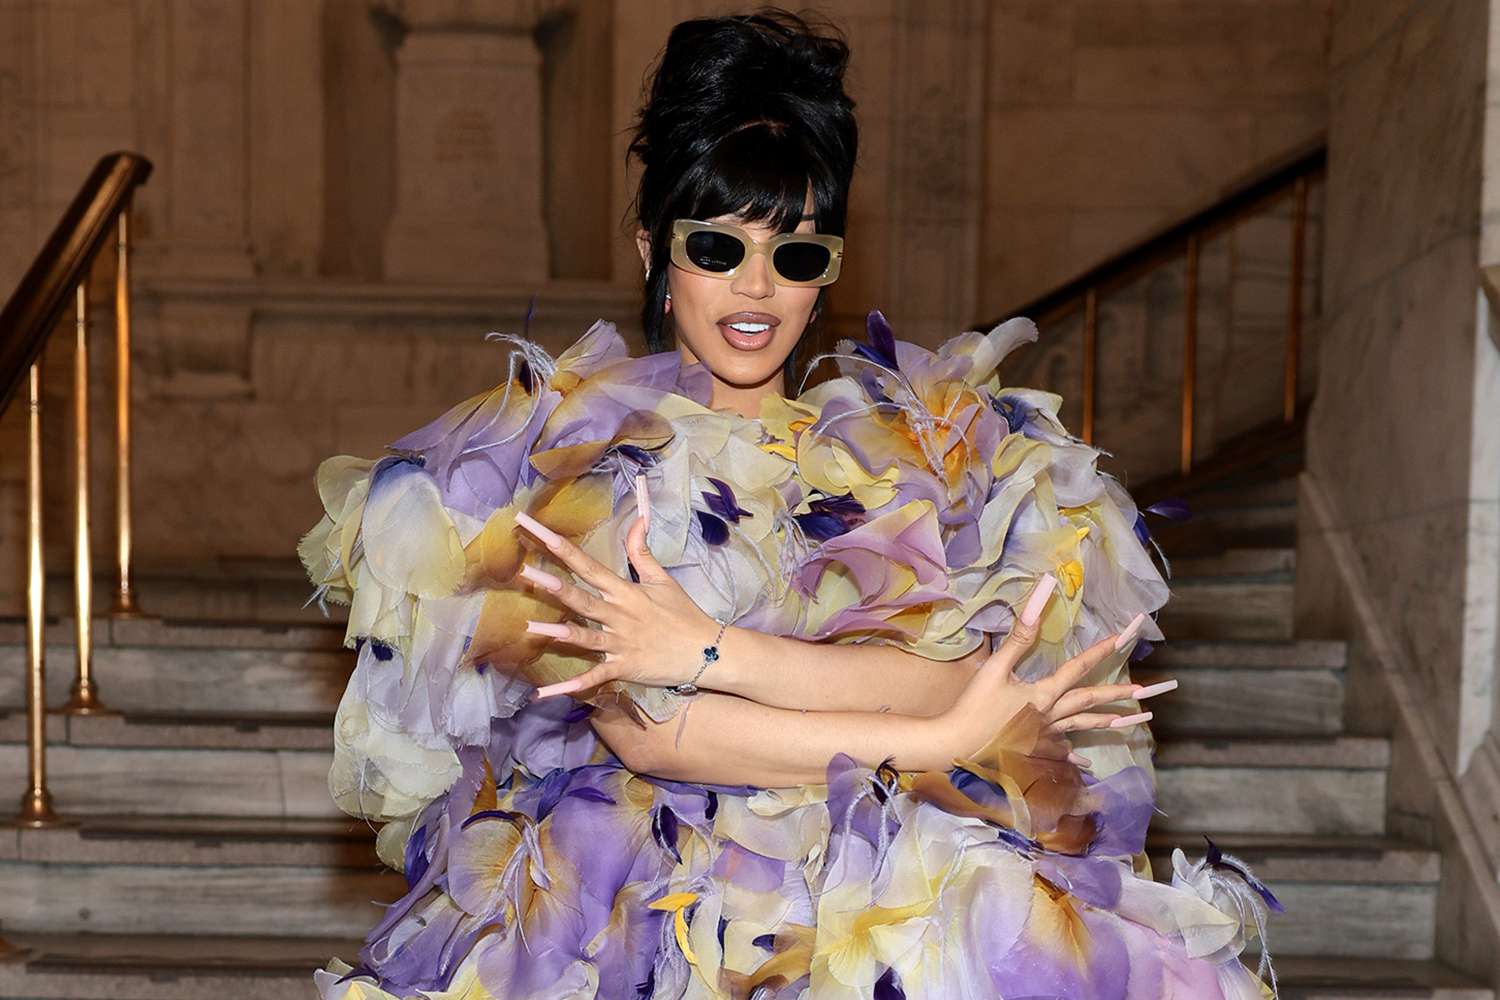 Cardi B Wows in an Explosion of Fabric and Sky-High Heels at Marc Jacobs Fashion Show